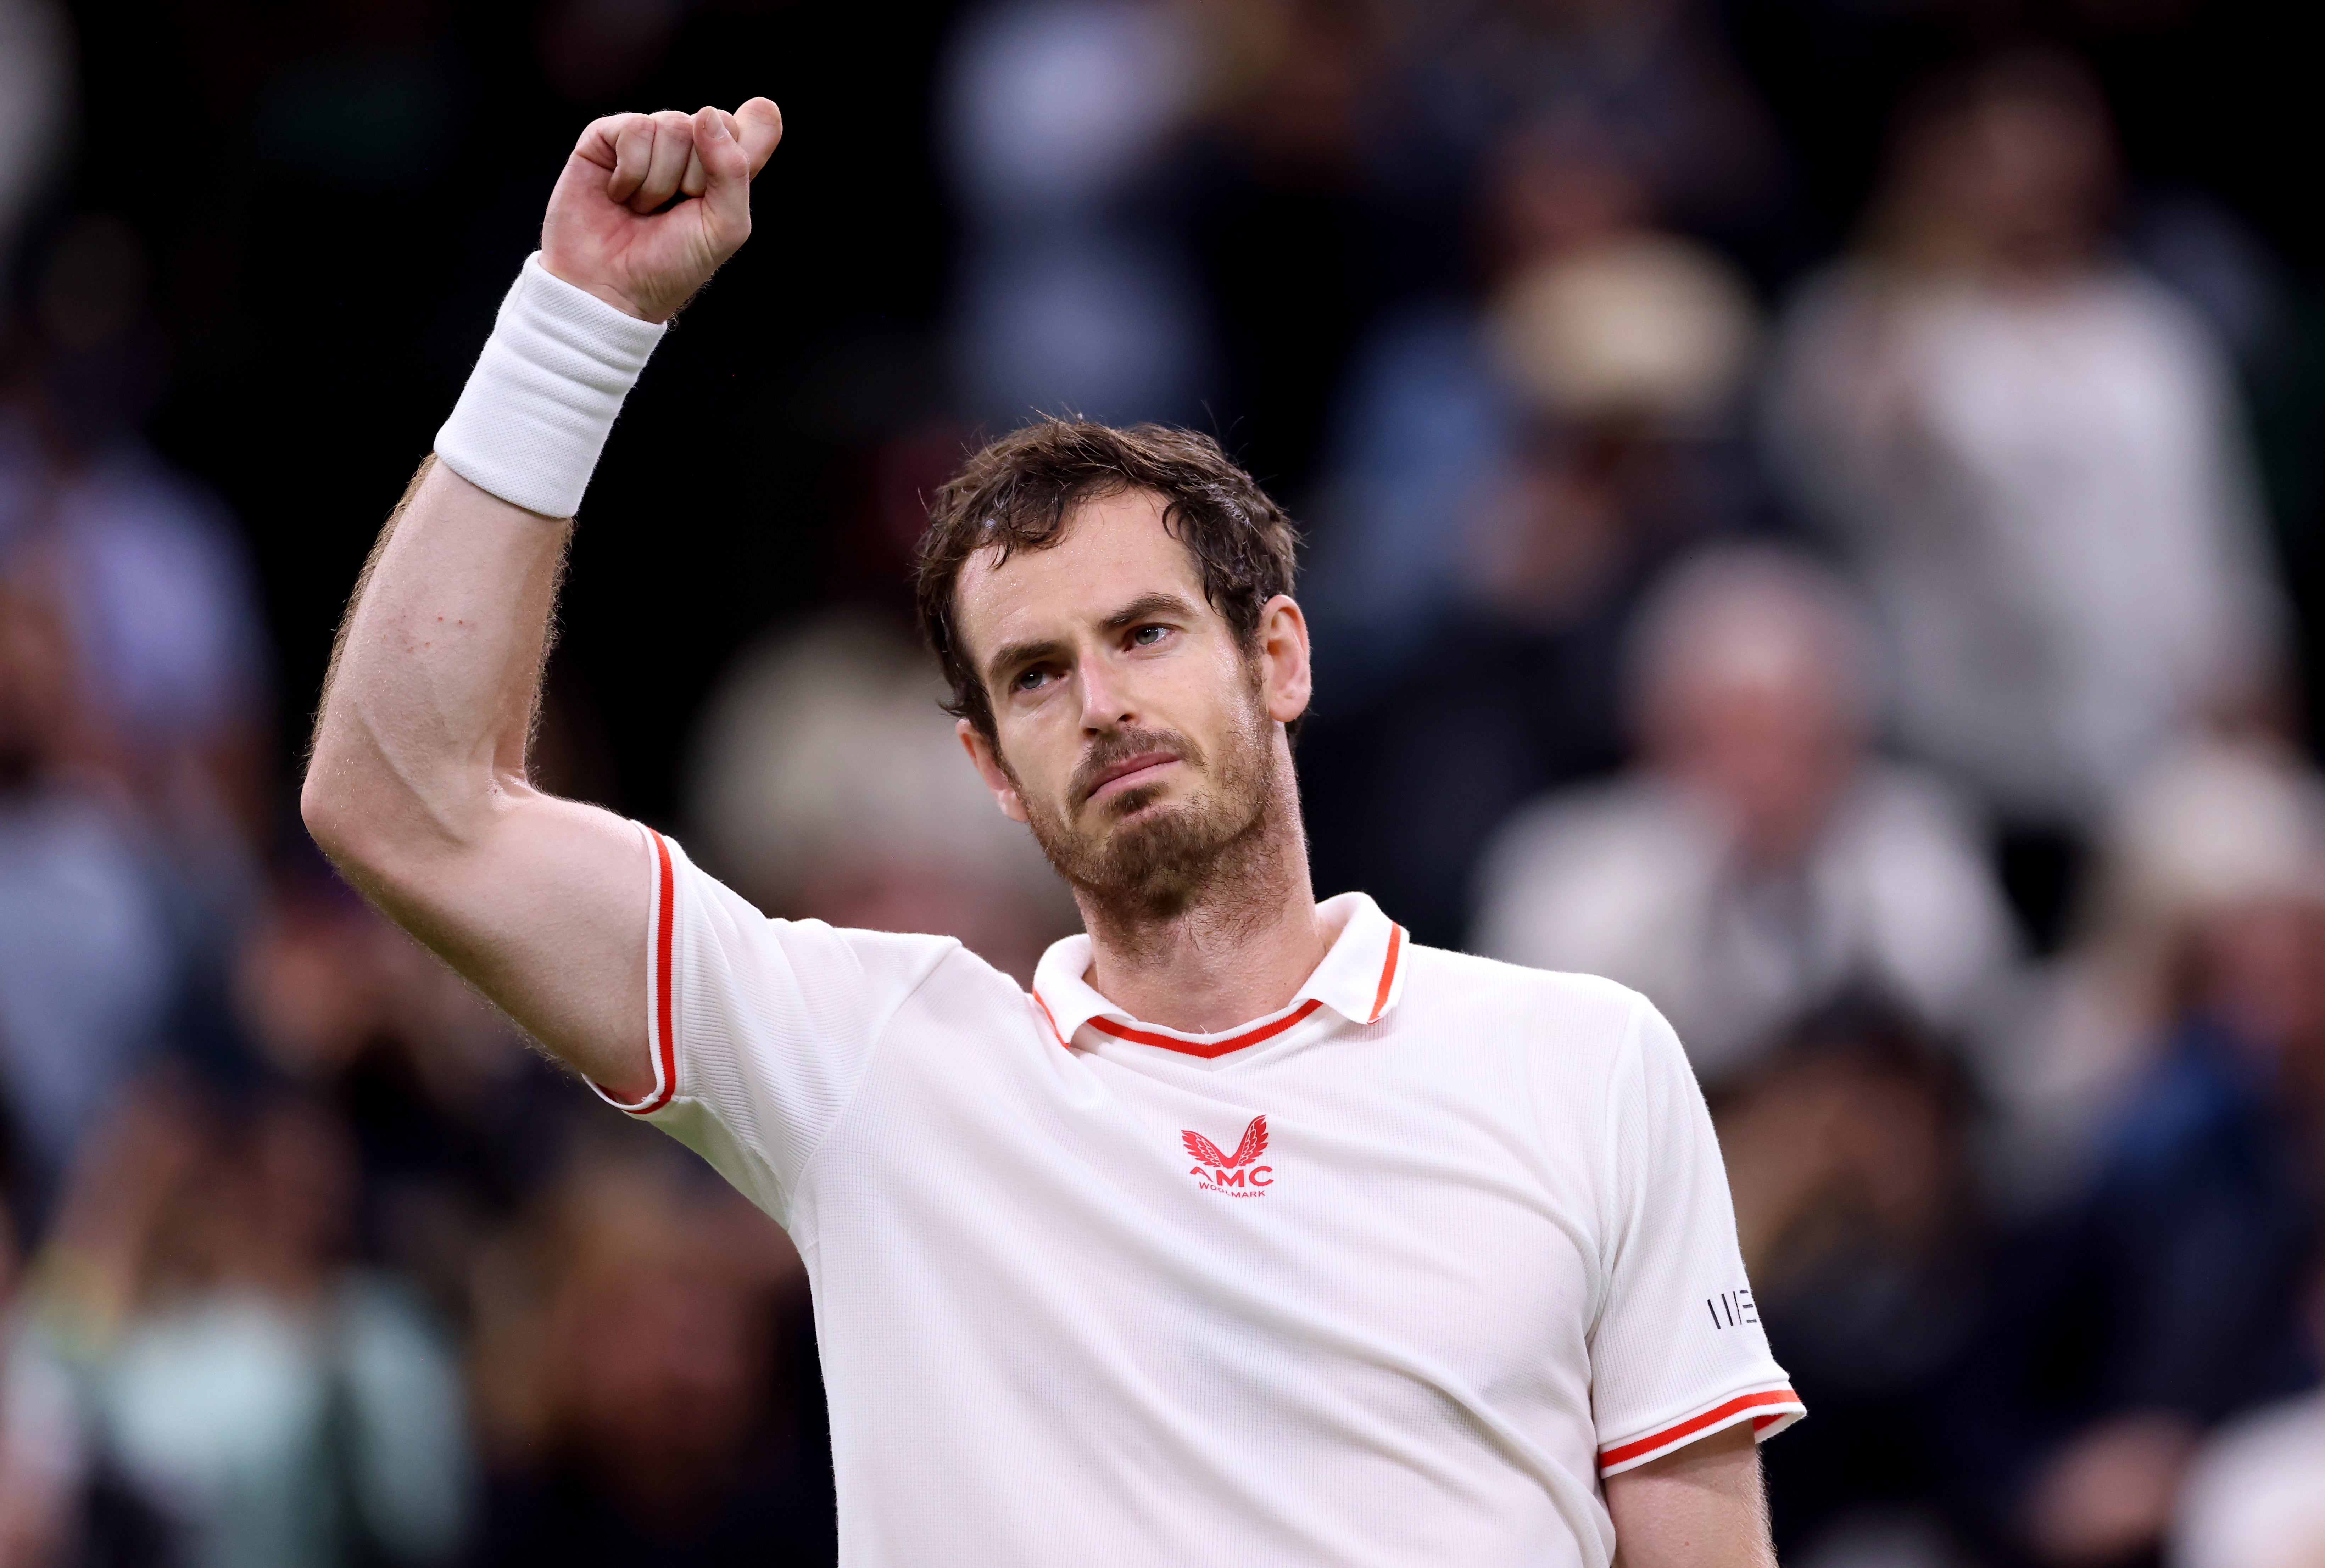 Andy Murray said the Government’s guidance to Russian and Belarusian players could put their families at risk (Steven Paston/PA)